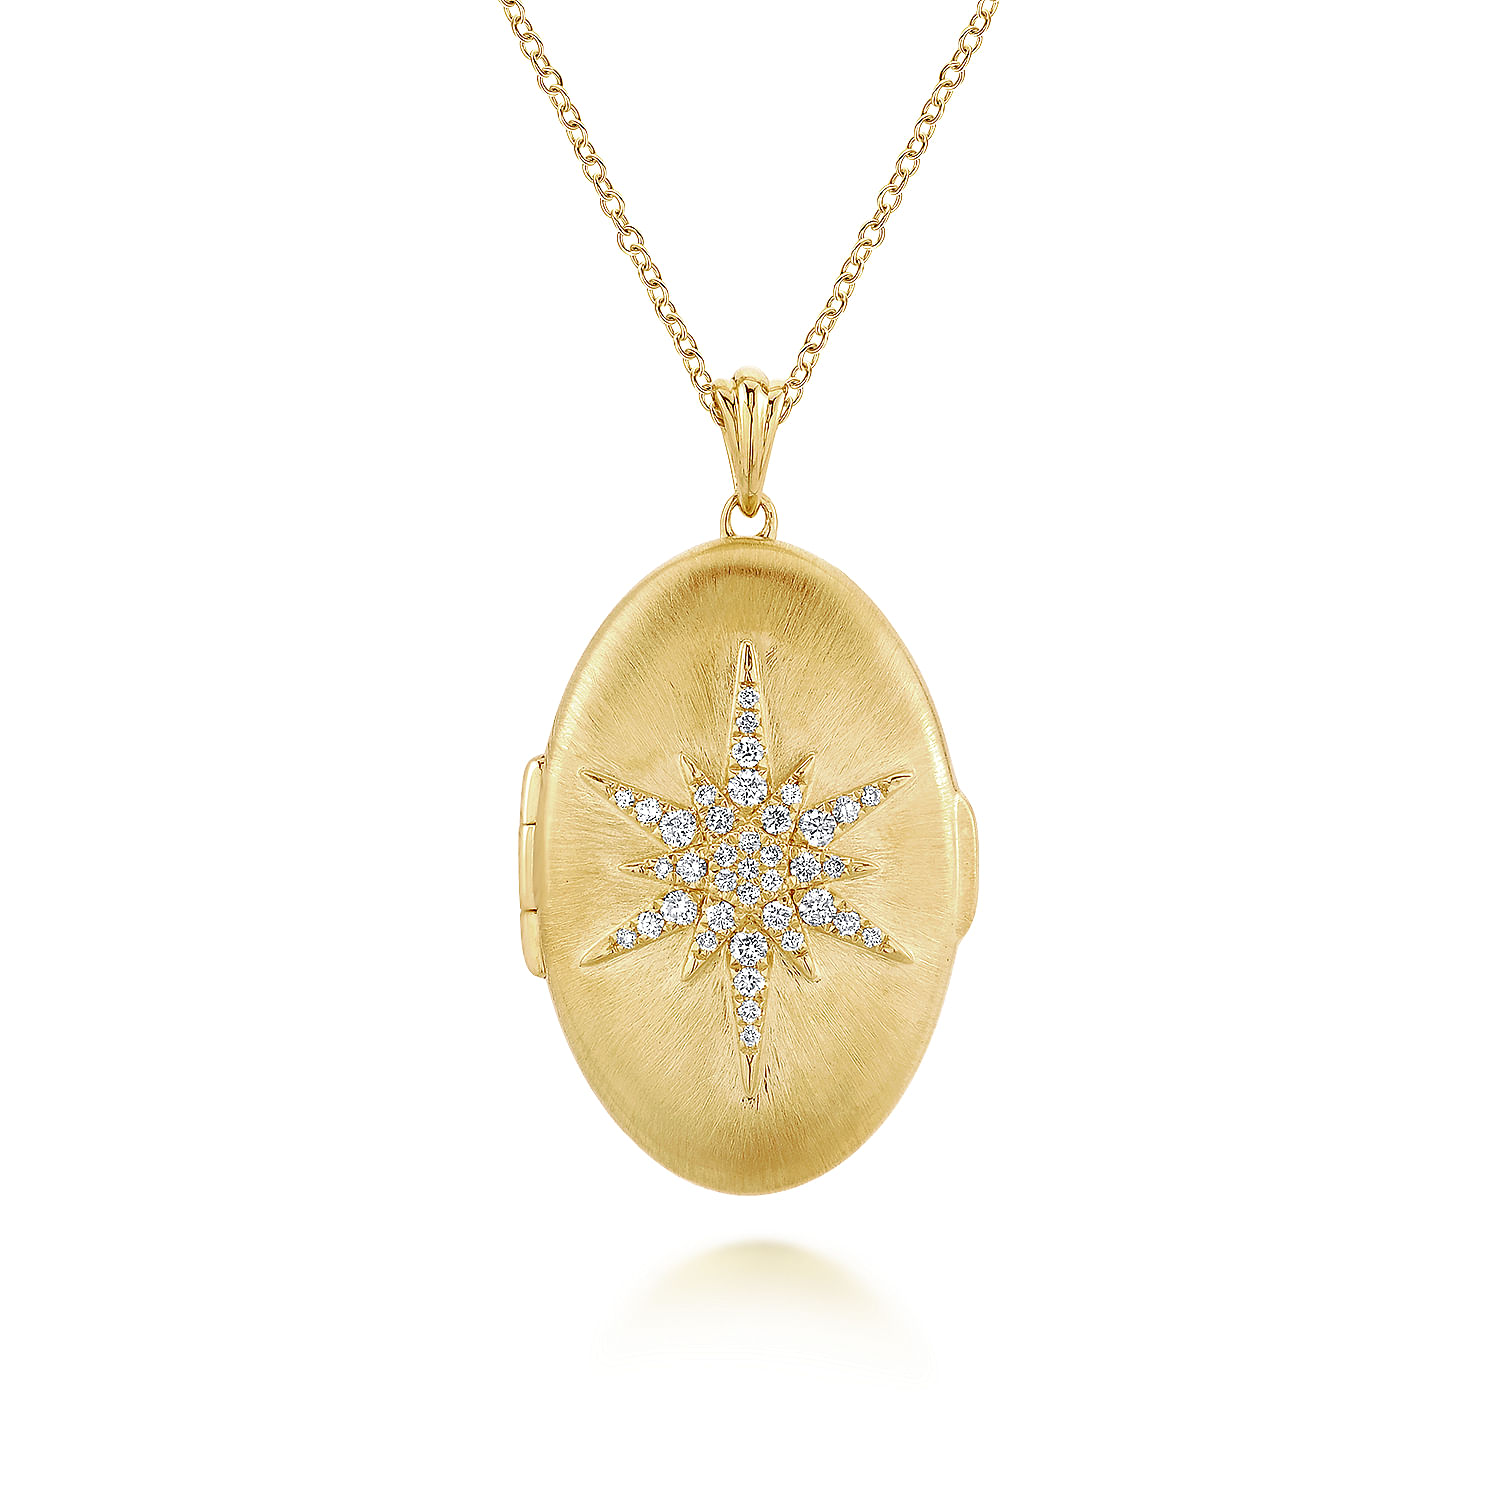 25 inch 14K Yellow Gold Oval Locket Necklace with Diamond Starburst Overlay